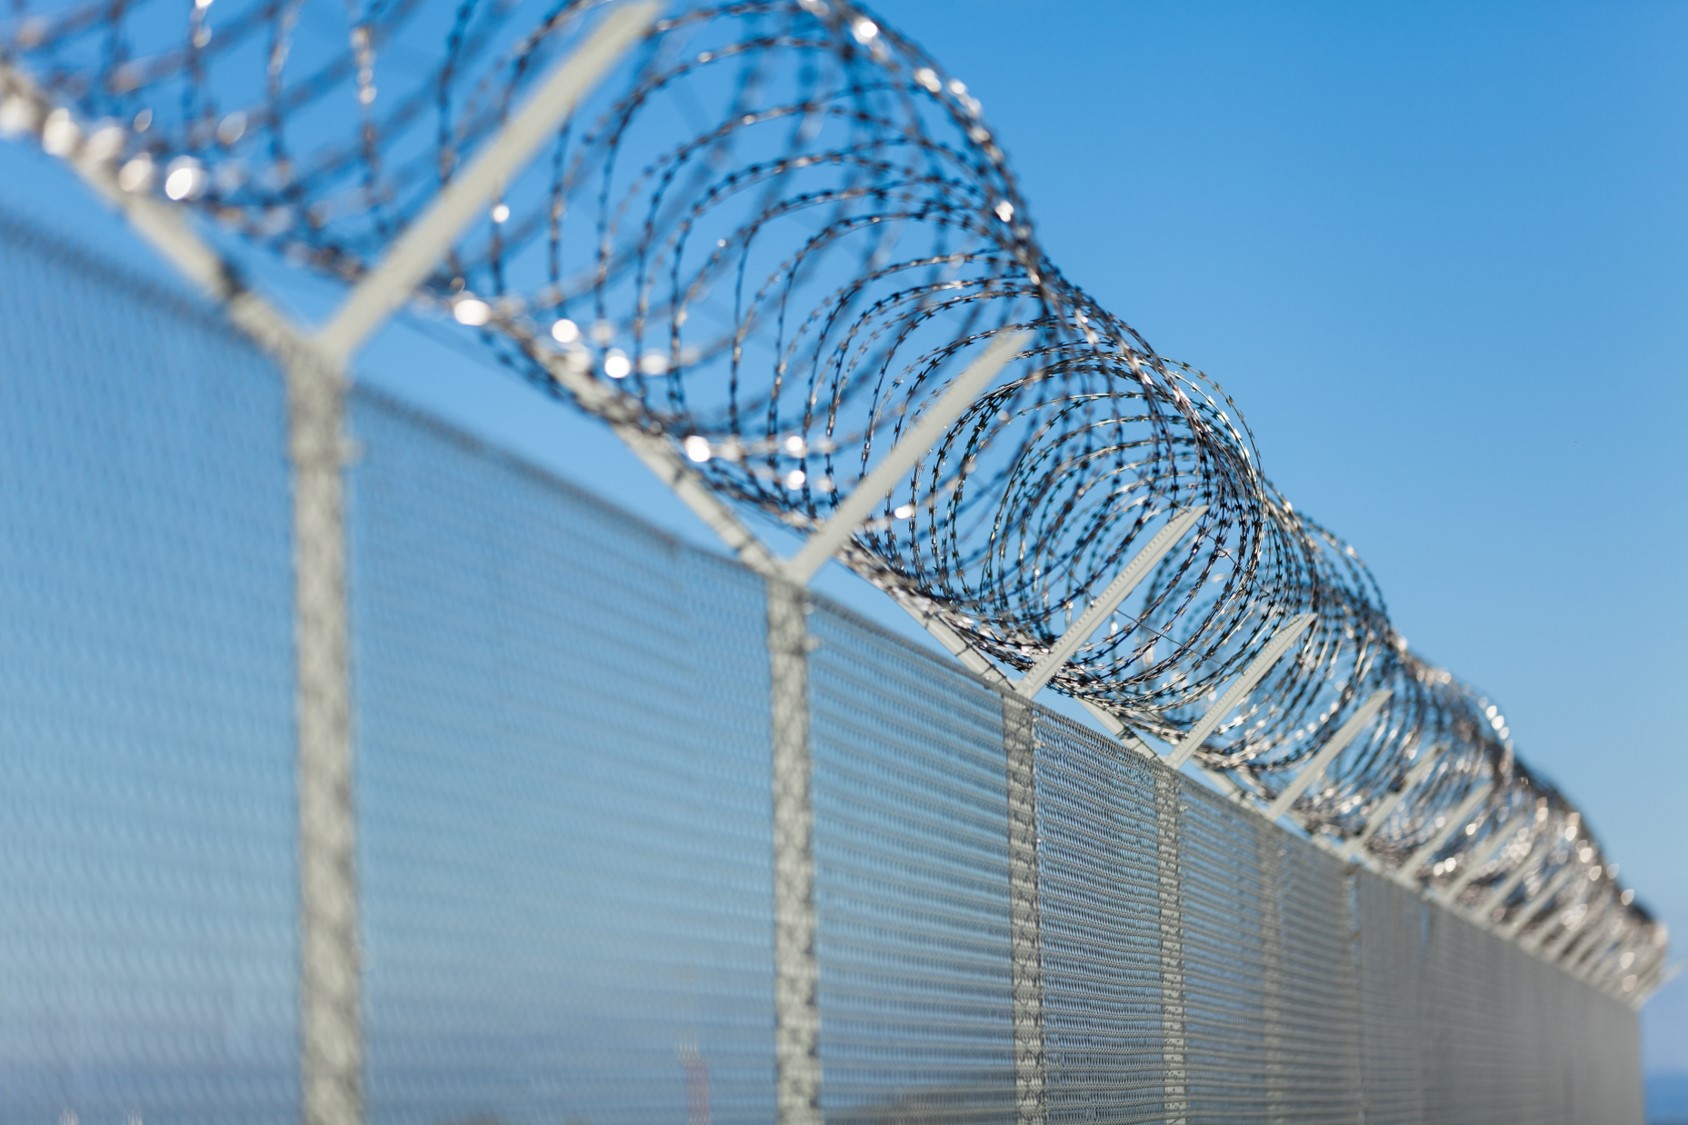 Perimeter fence with coils of barbed wire